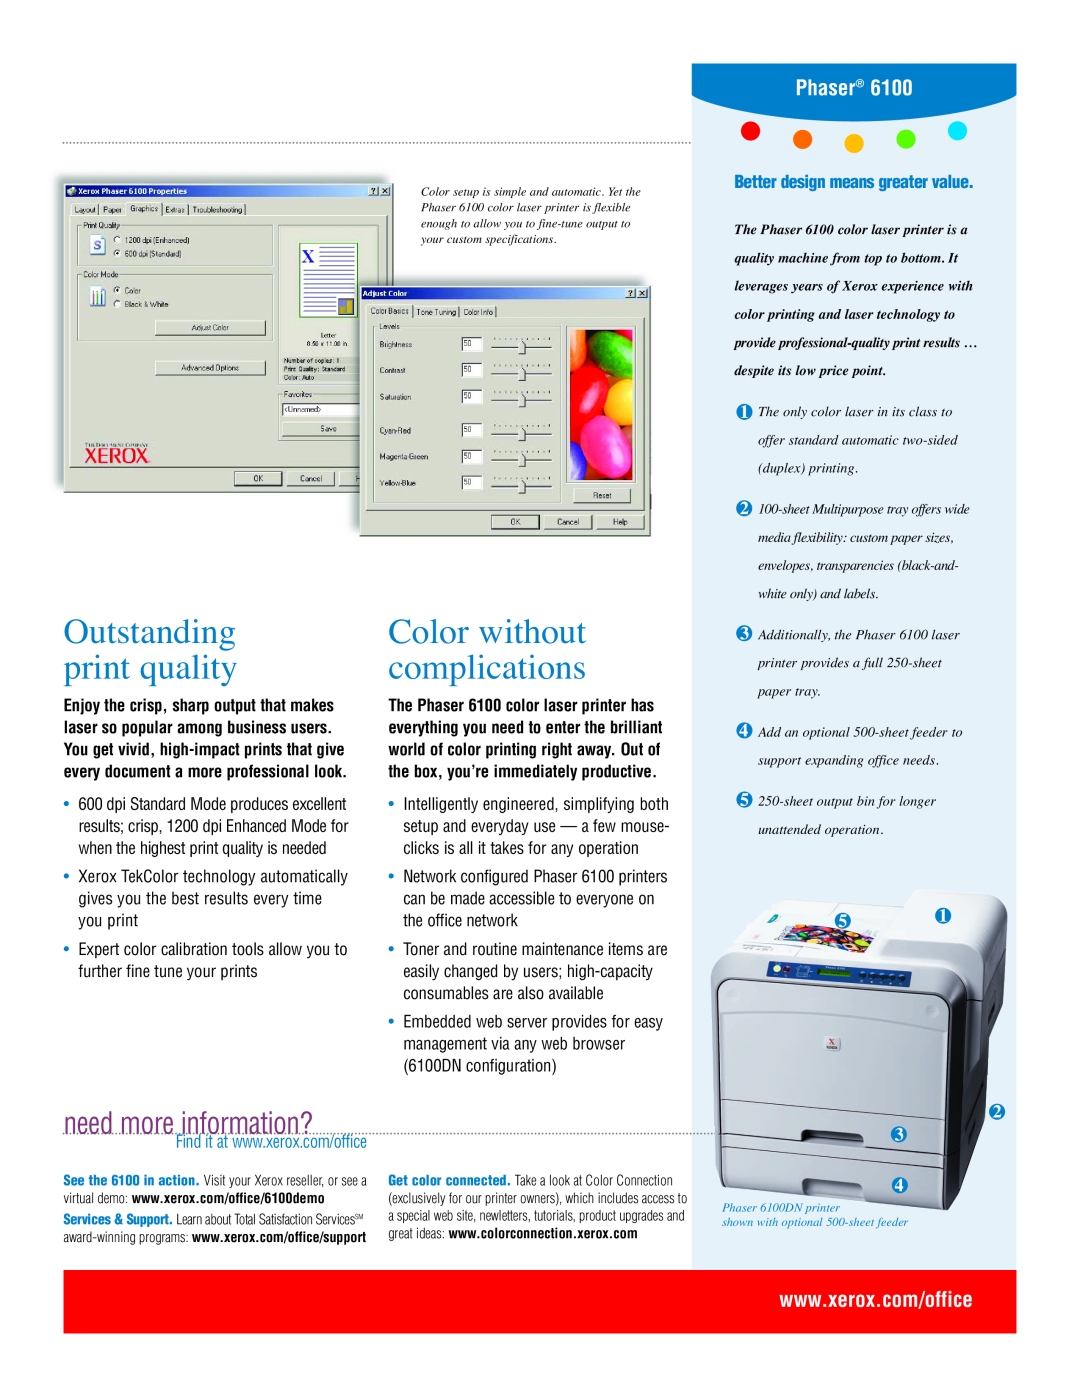 Xerox 6100DN manual Outstanding print quality, Color without complications, need more information?, Phaser 